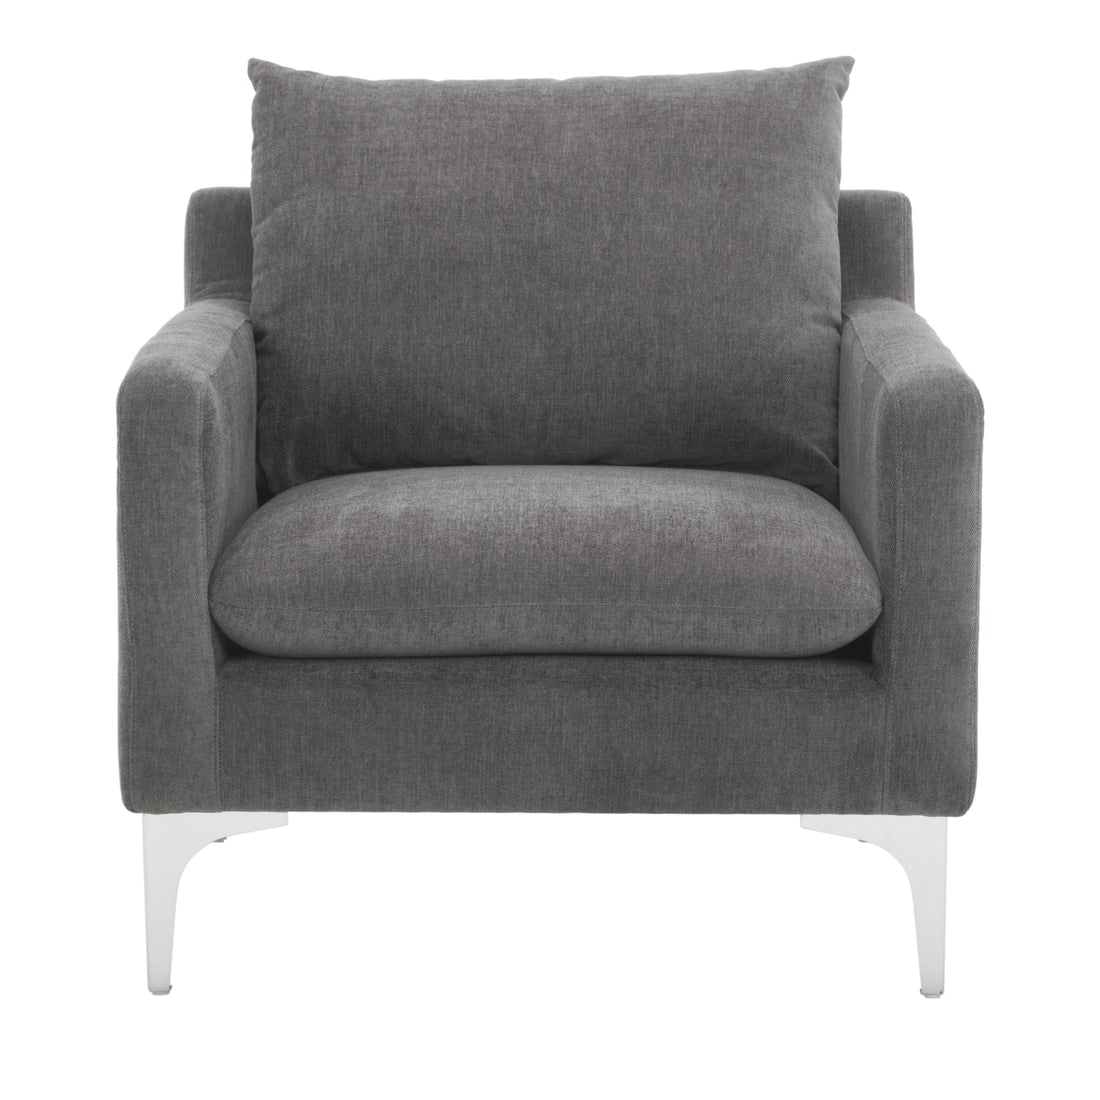 Armchair Anthracite: Anthracite Accent for Your Space